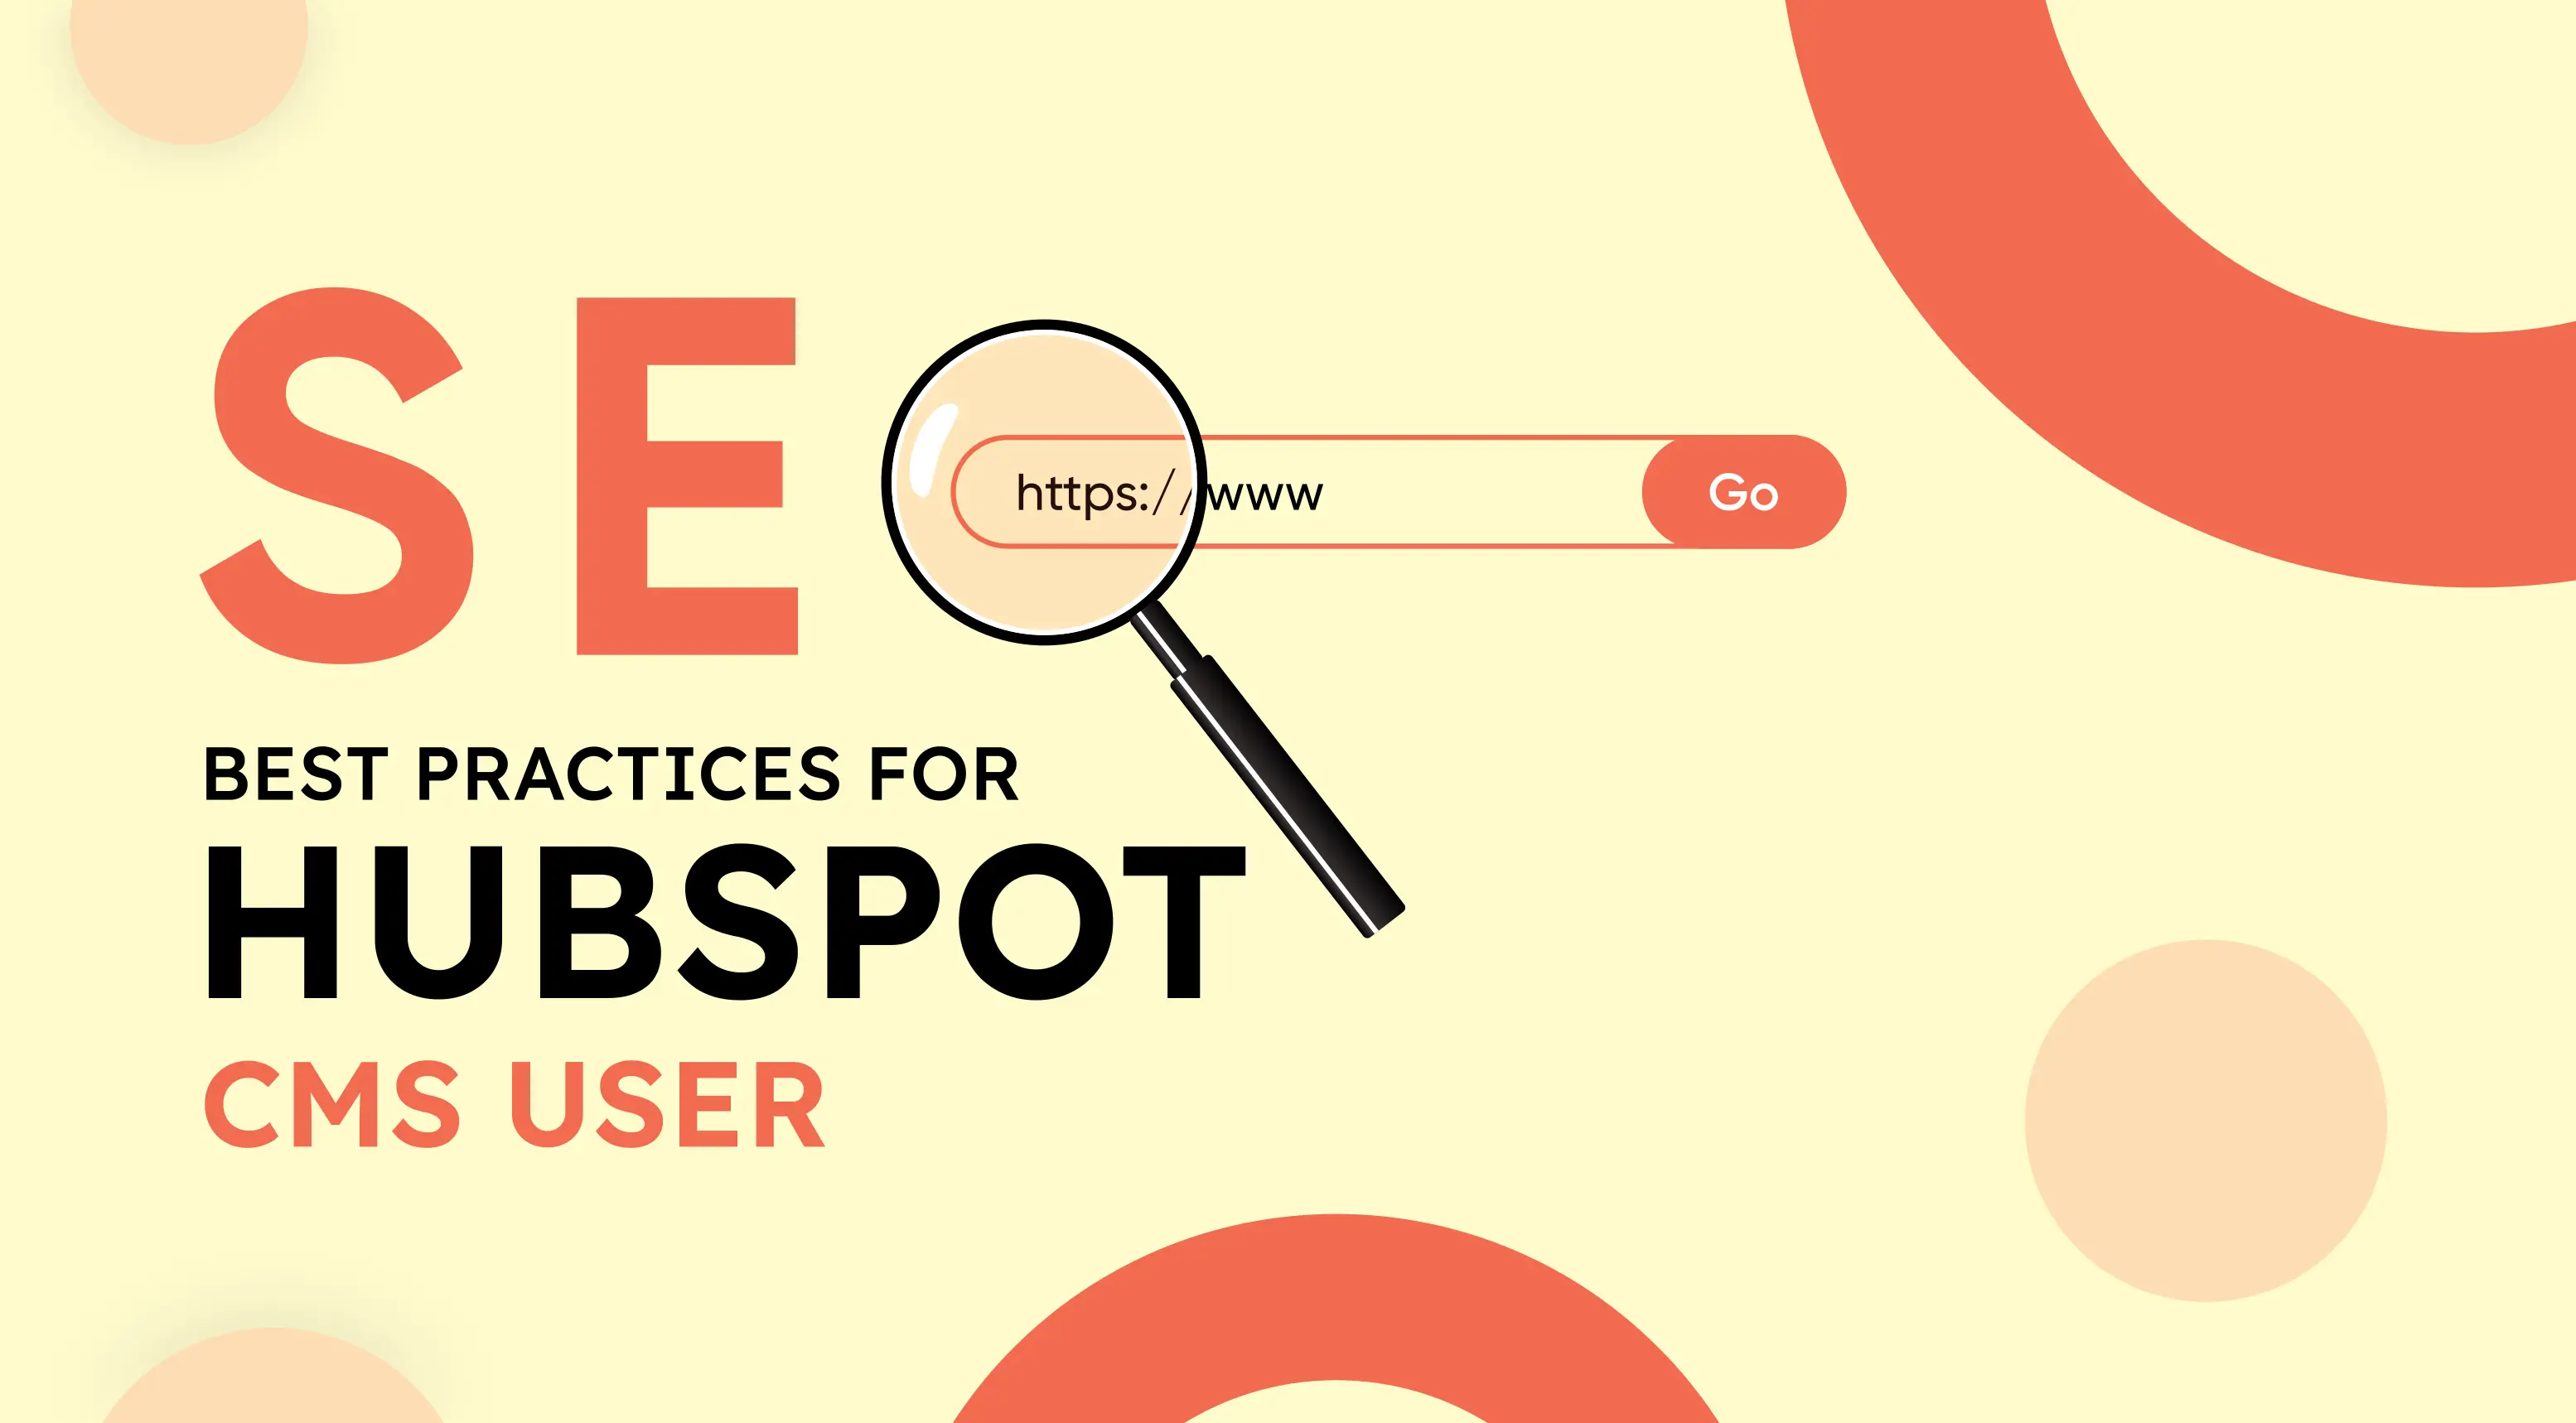 SEO Best Practices for HubSpot CMS Users